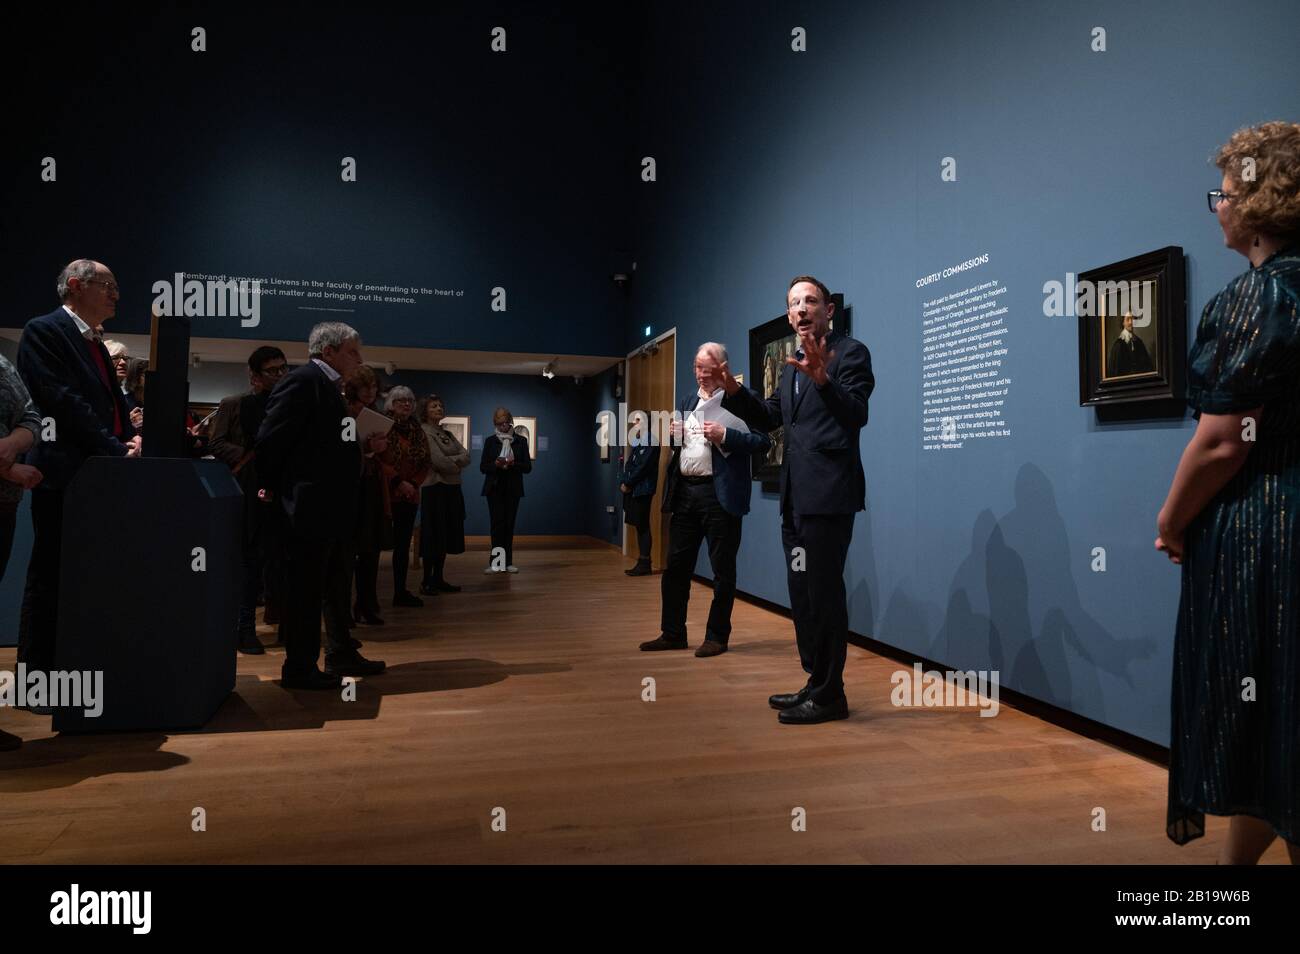 Oxford, UK. Monday 24th February 2020. Dr Xa Sturgis (director of the Asmolean) at the launch of the Young Rembrandt exhibition at The Ashmolean Museum, Oxford. Credit: Andrew Walmsley/Alamy Live News Stock Photo